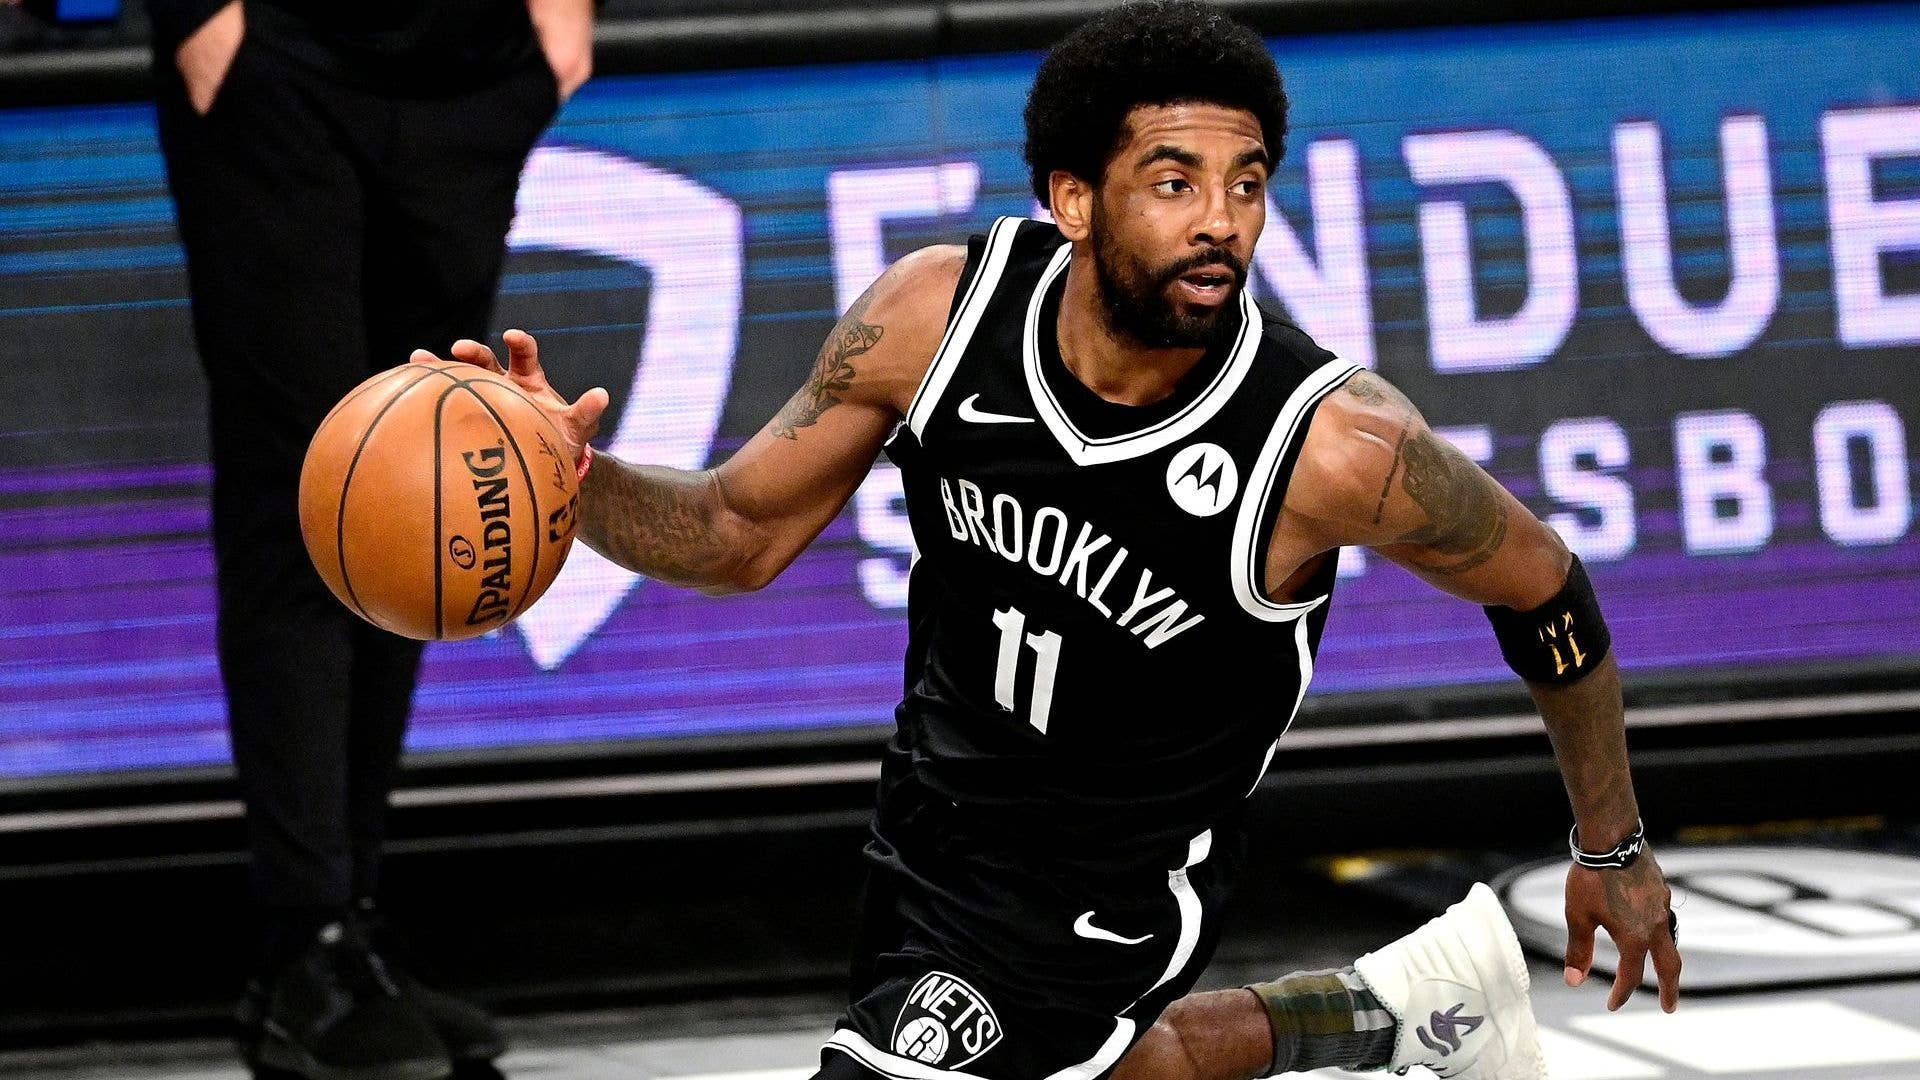 Kyrie Irving at the 2021 NBA Playoffs at Barclays Center